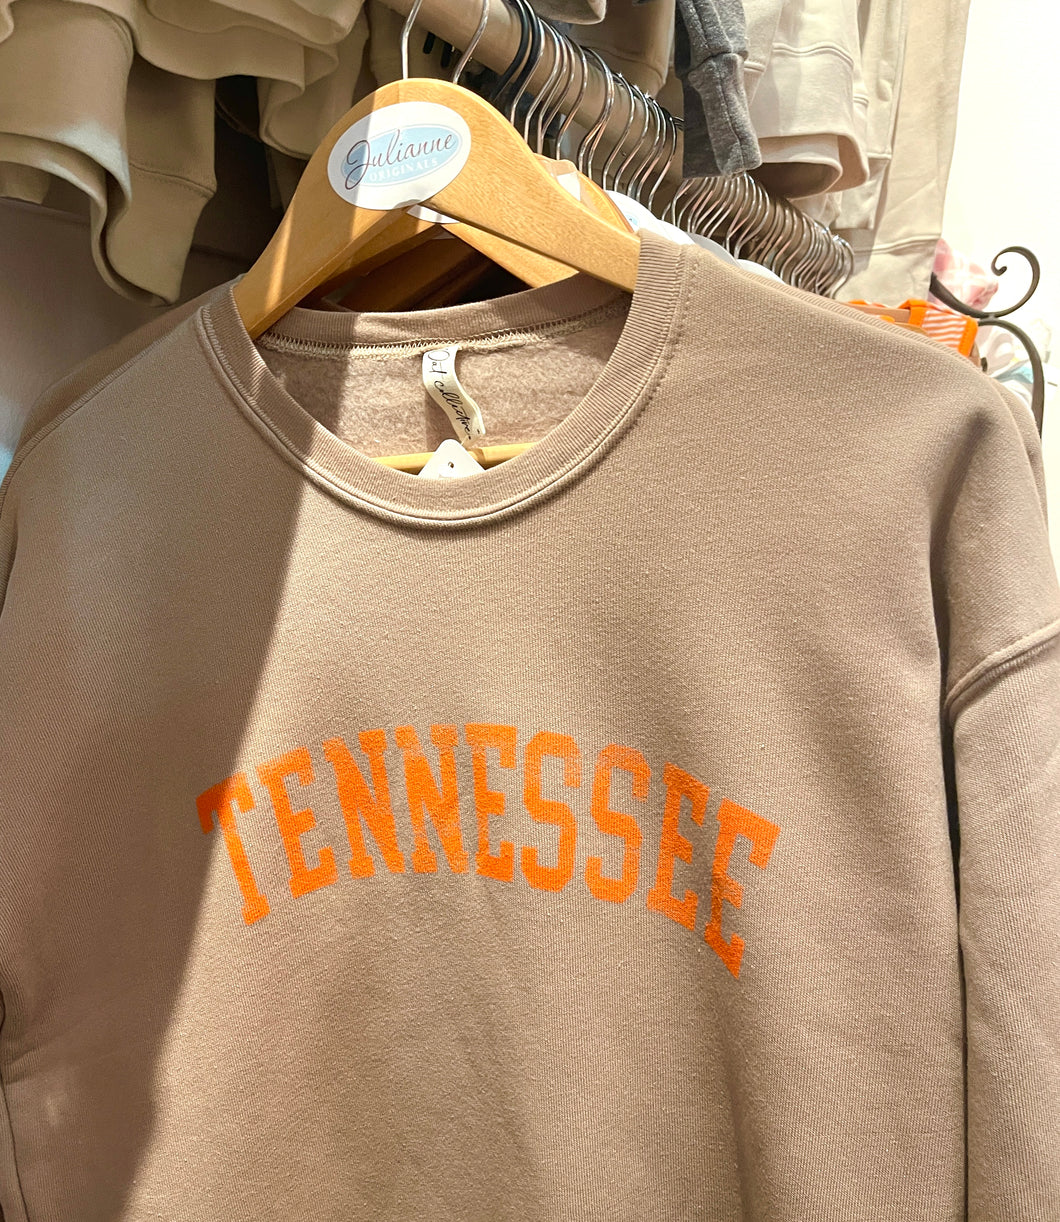 TENNESSEE Arched Tan Sweatshirt - Womens